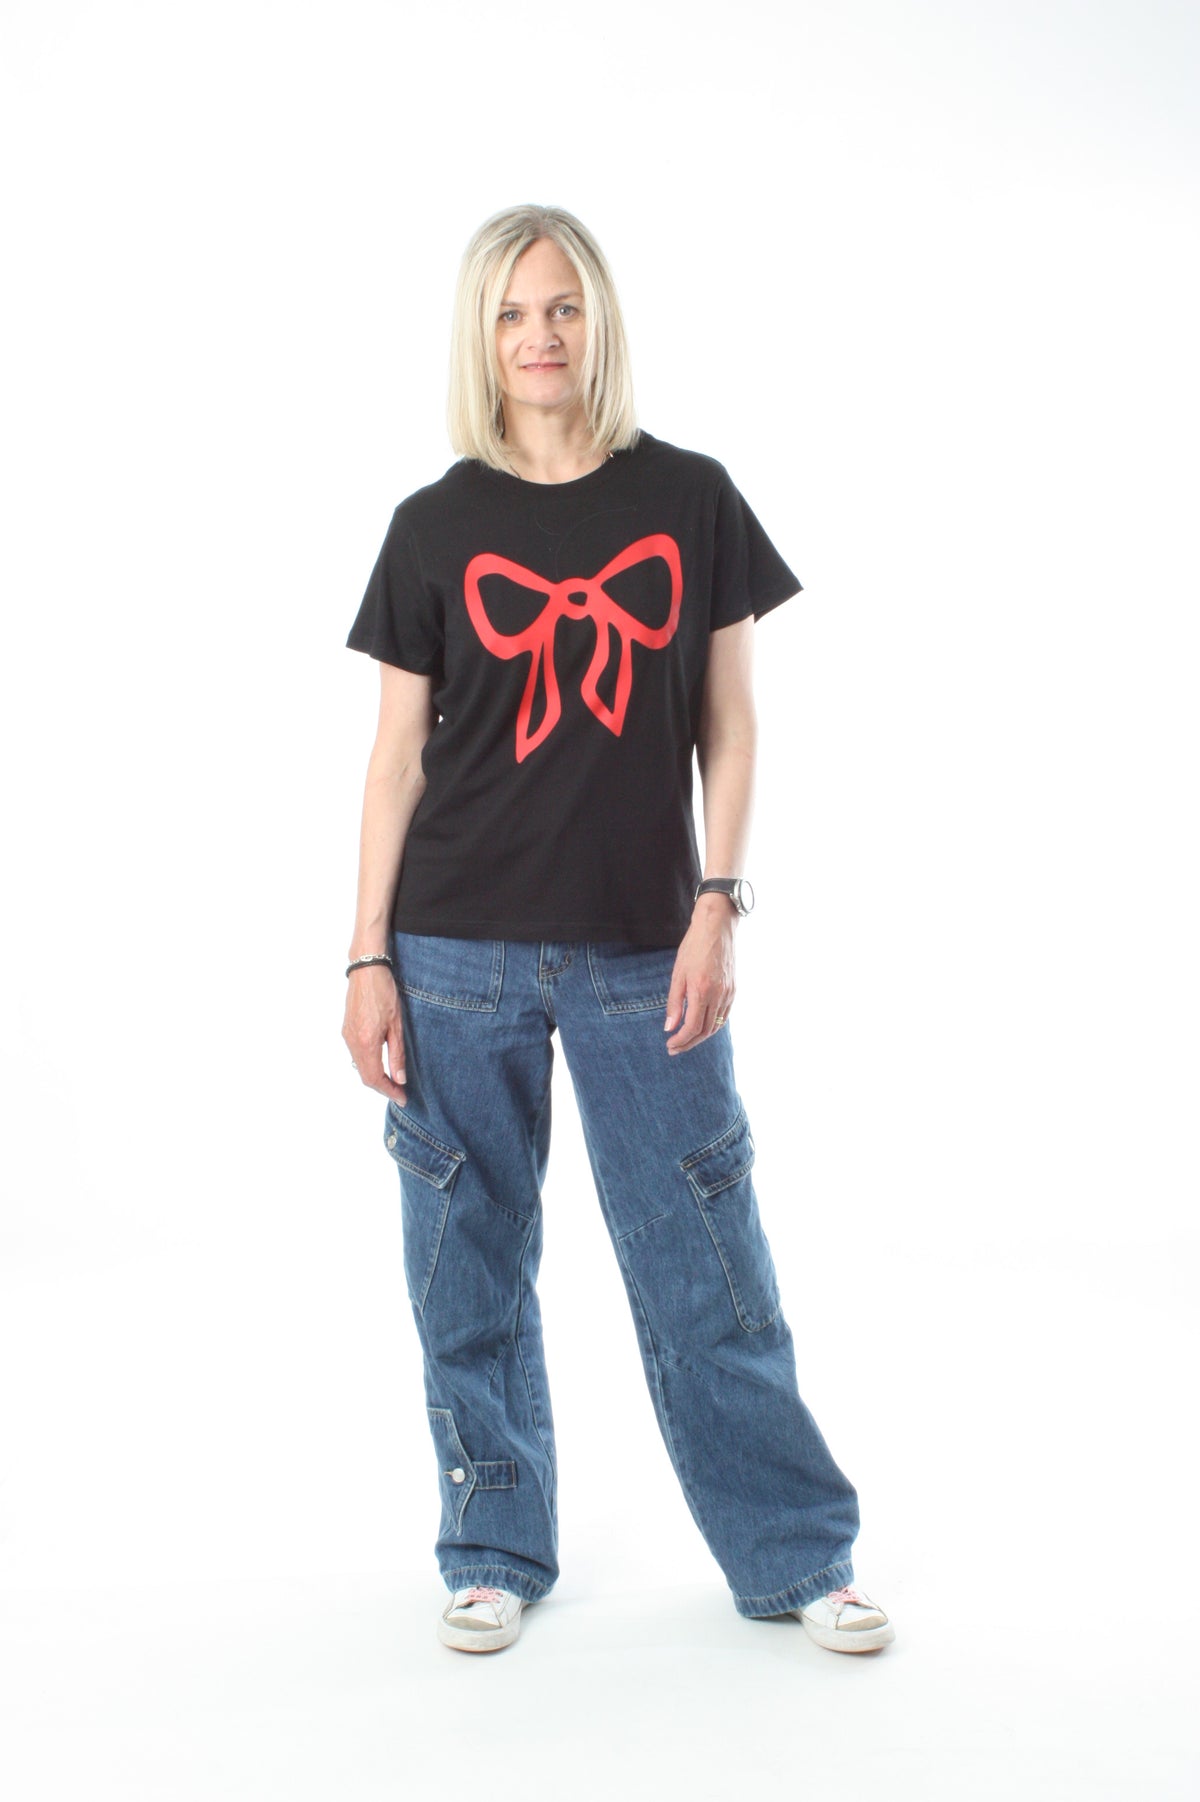 Tee Shirt - Black with Red Bow Print